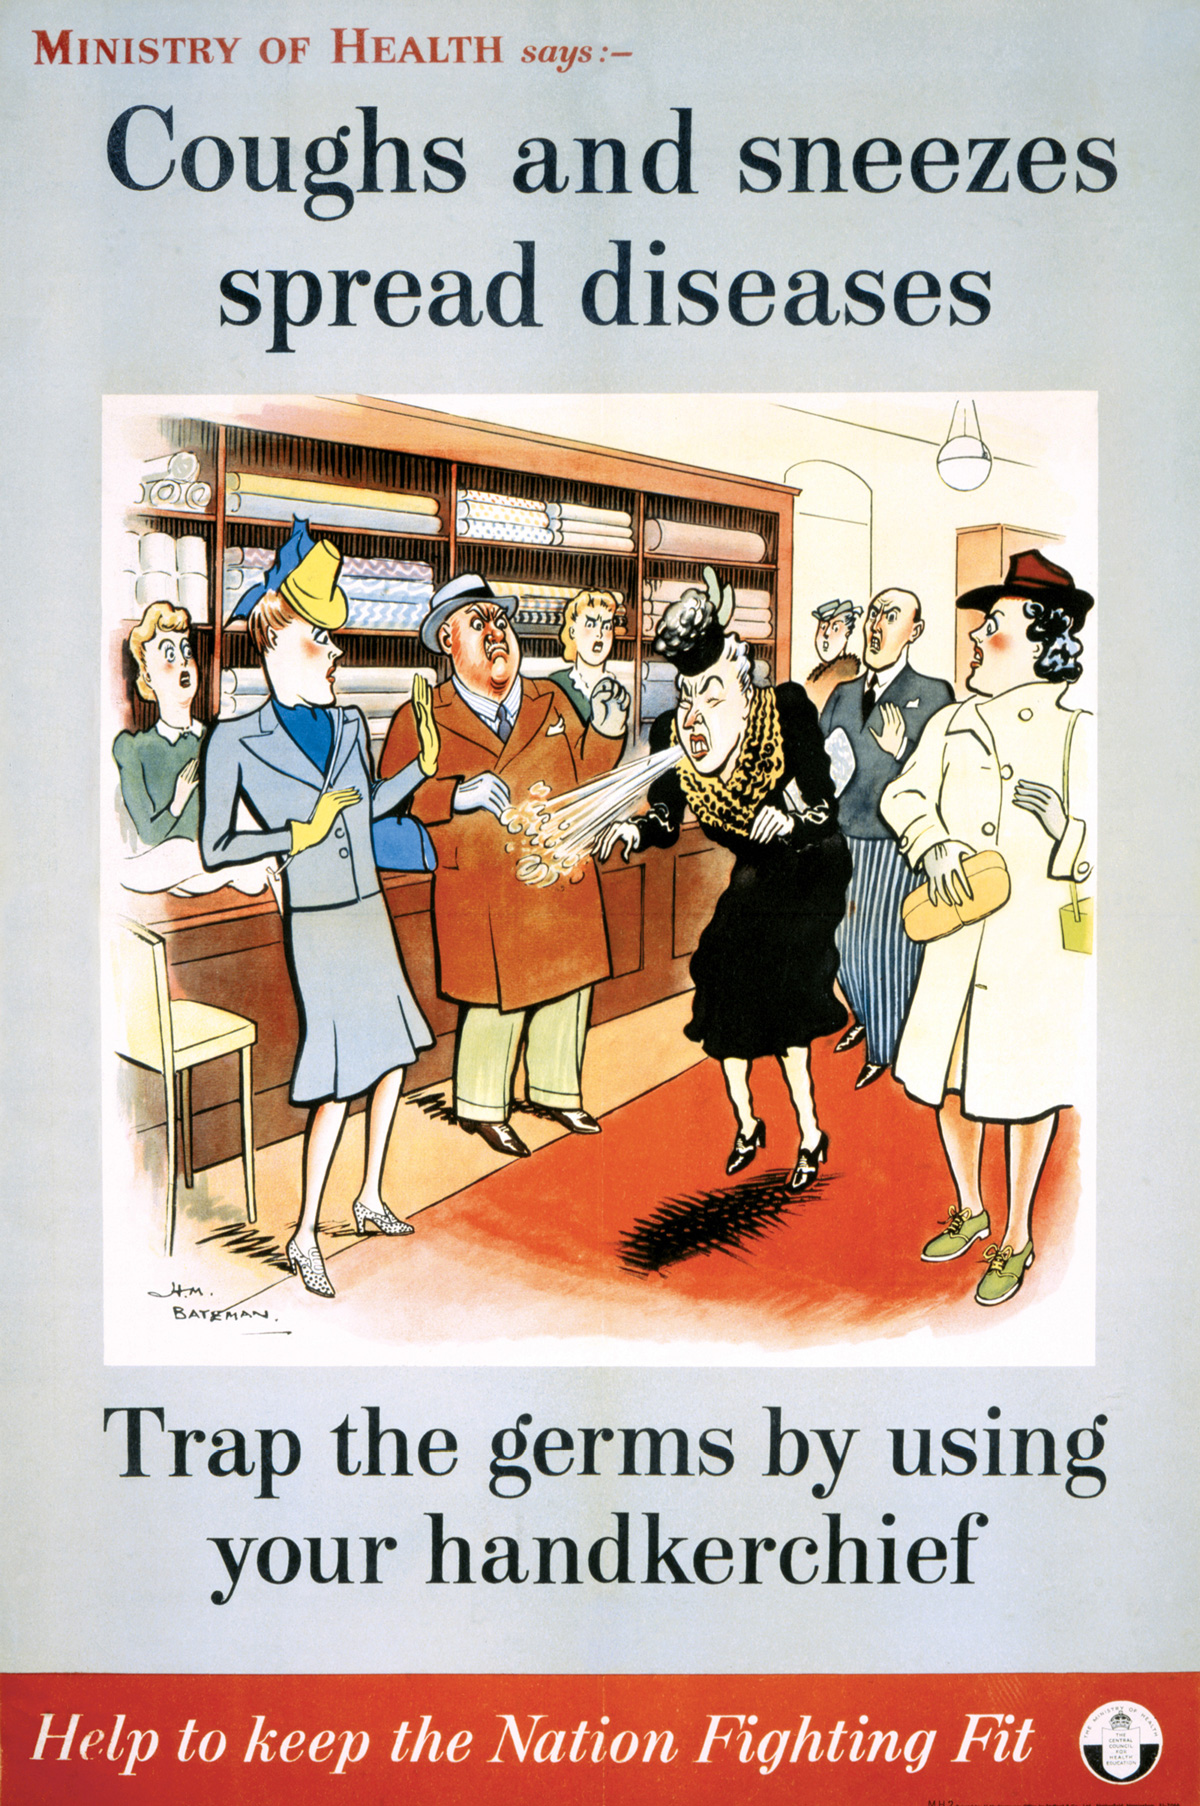 A drawing by Herbert Mayo Bateman, from the “Coughs & Sneezes Spread Diseases” series commissioned by the Ministry of Health, England, ninerteen forty two.